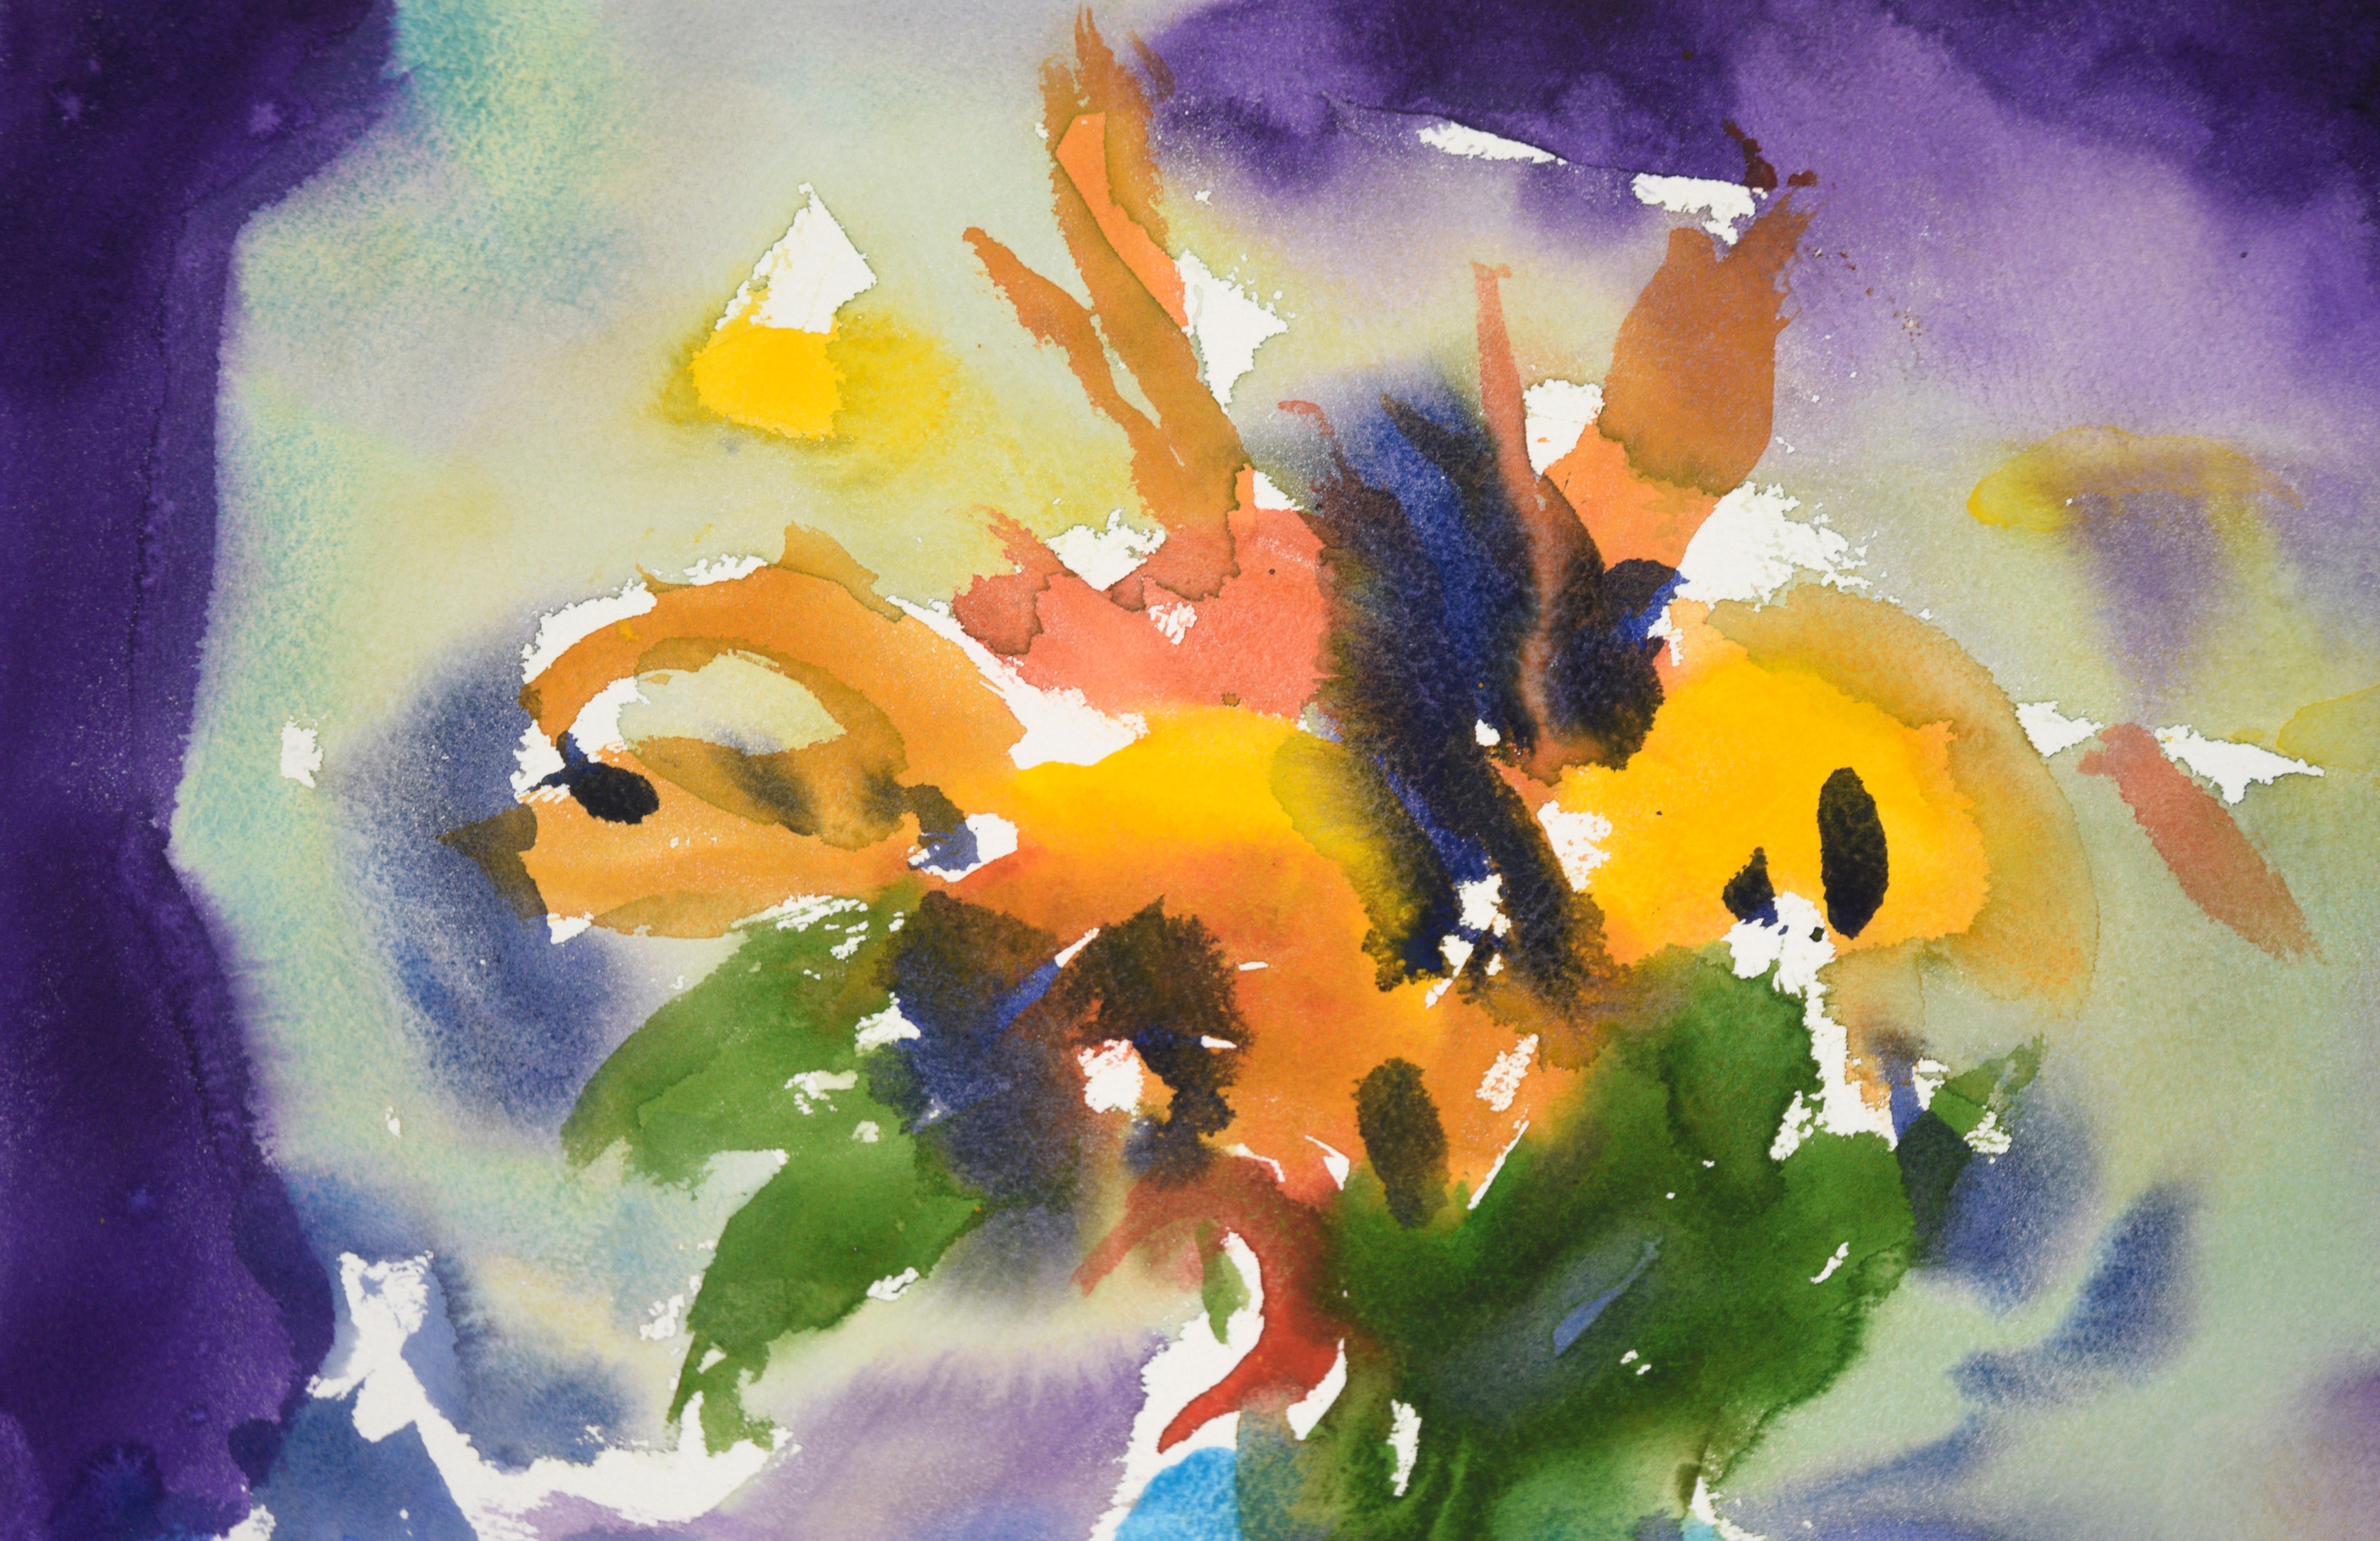 Abstract Still Life with Bouquets and Fruit in Watercolor on Paper - Art by Les Anderson